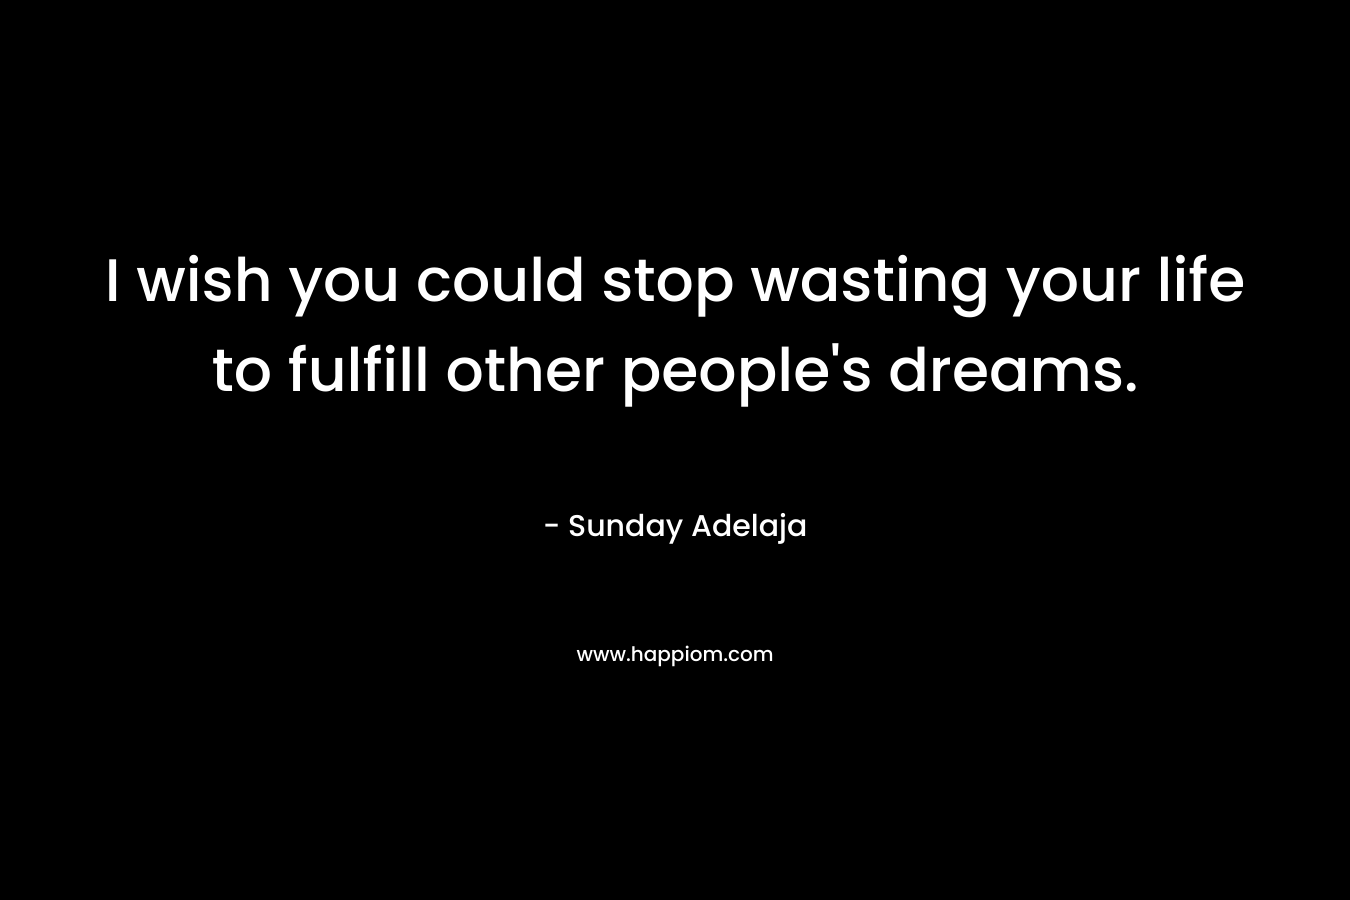 I wish you could stop wasting your life to fulfill other people's dreams.